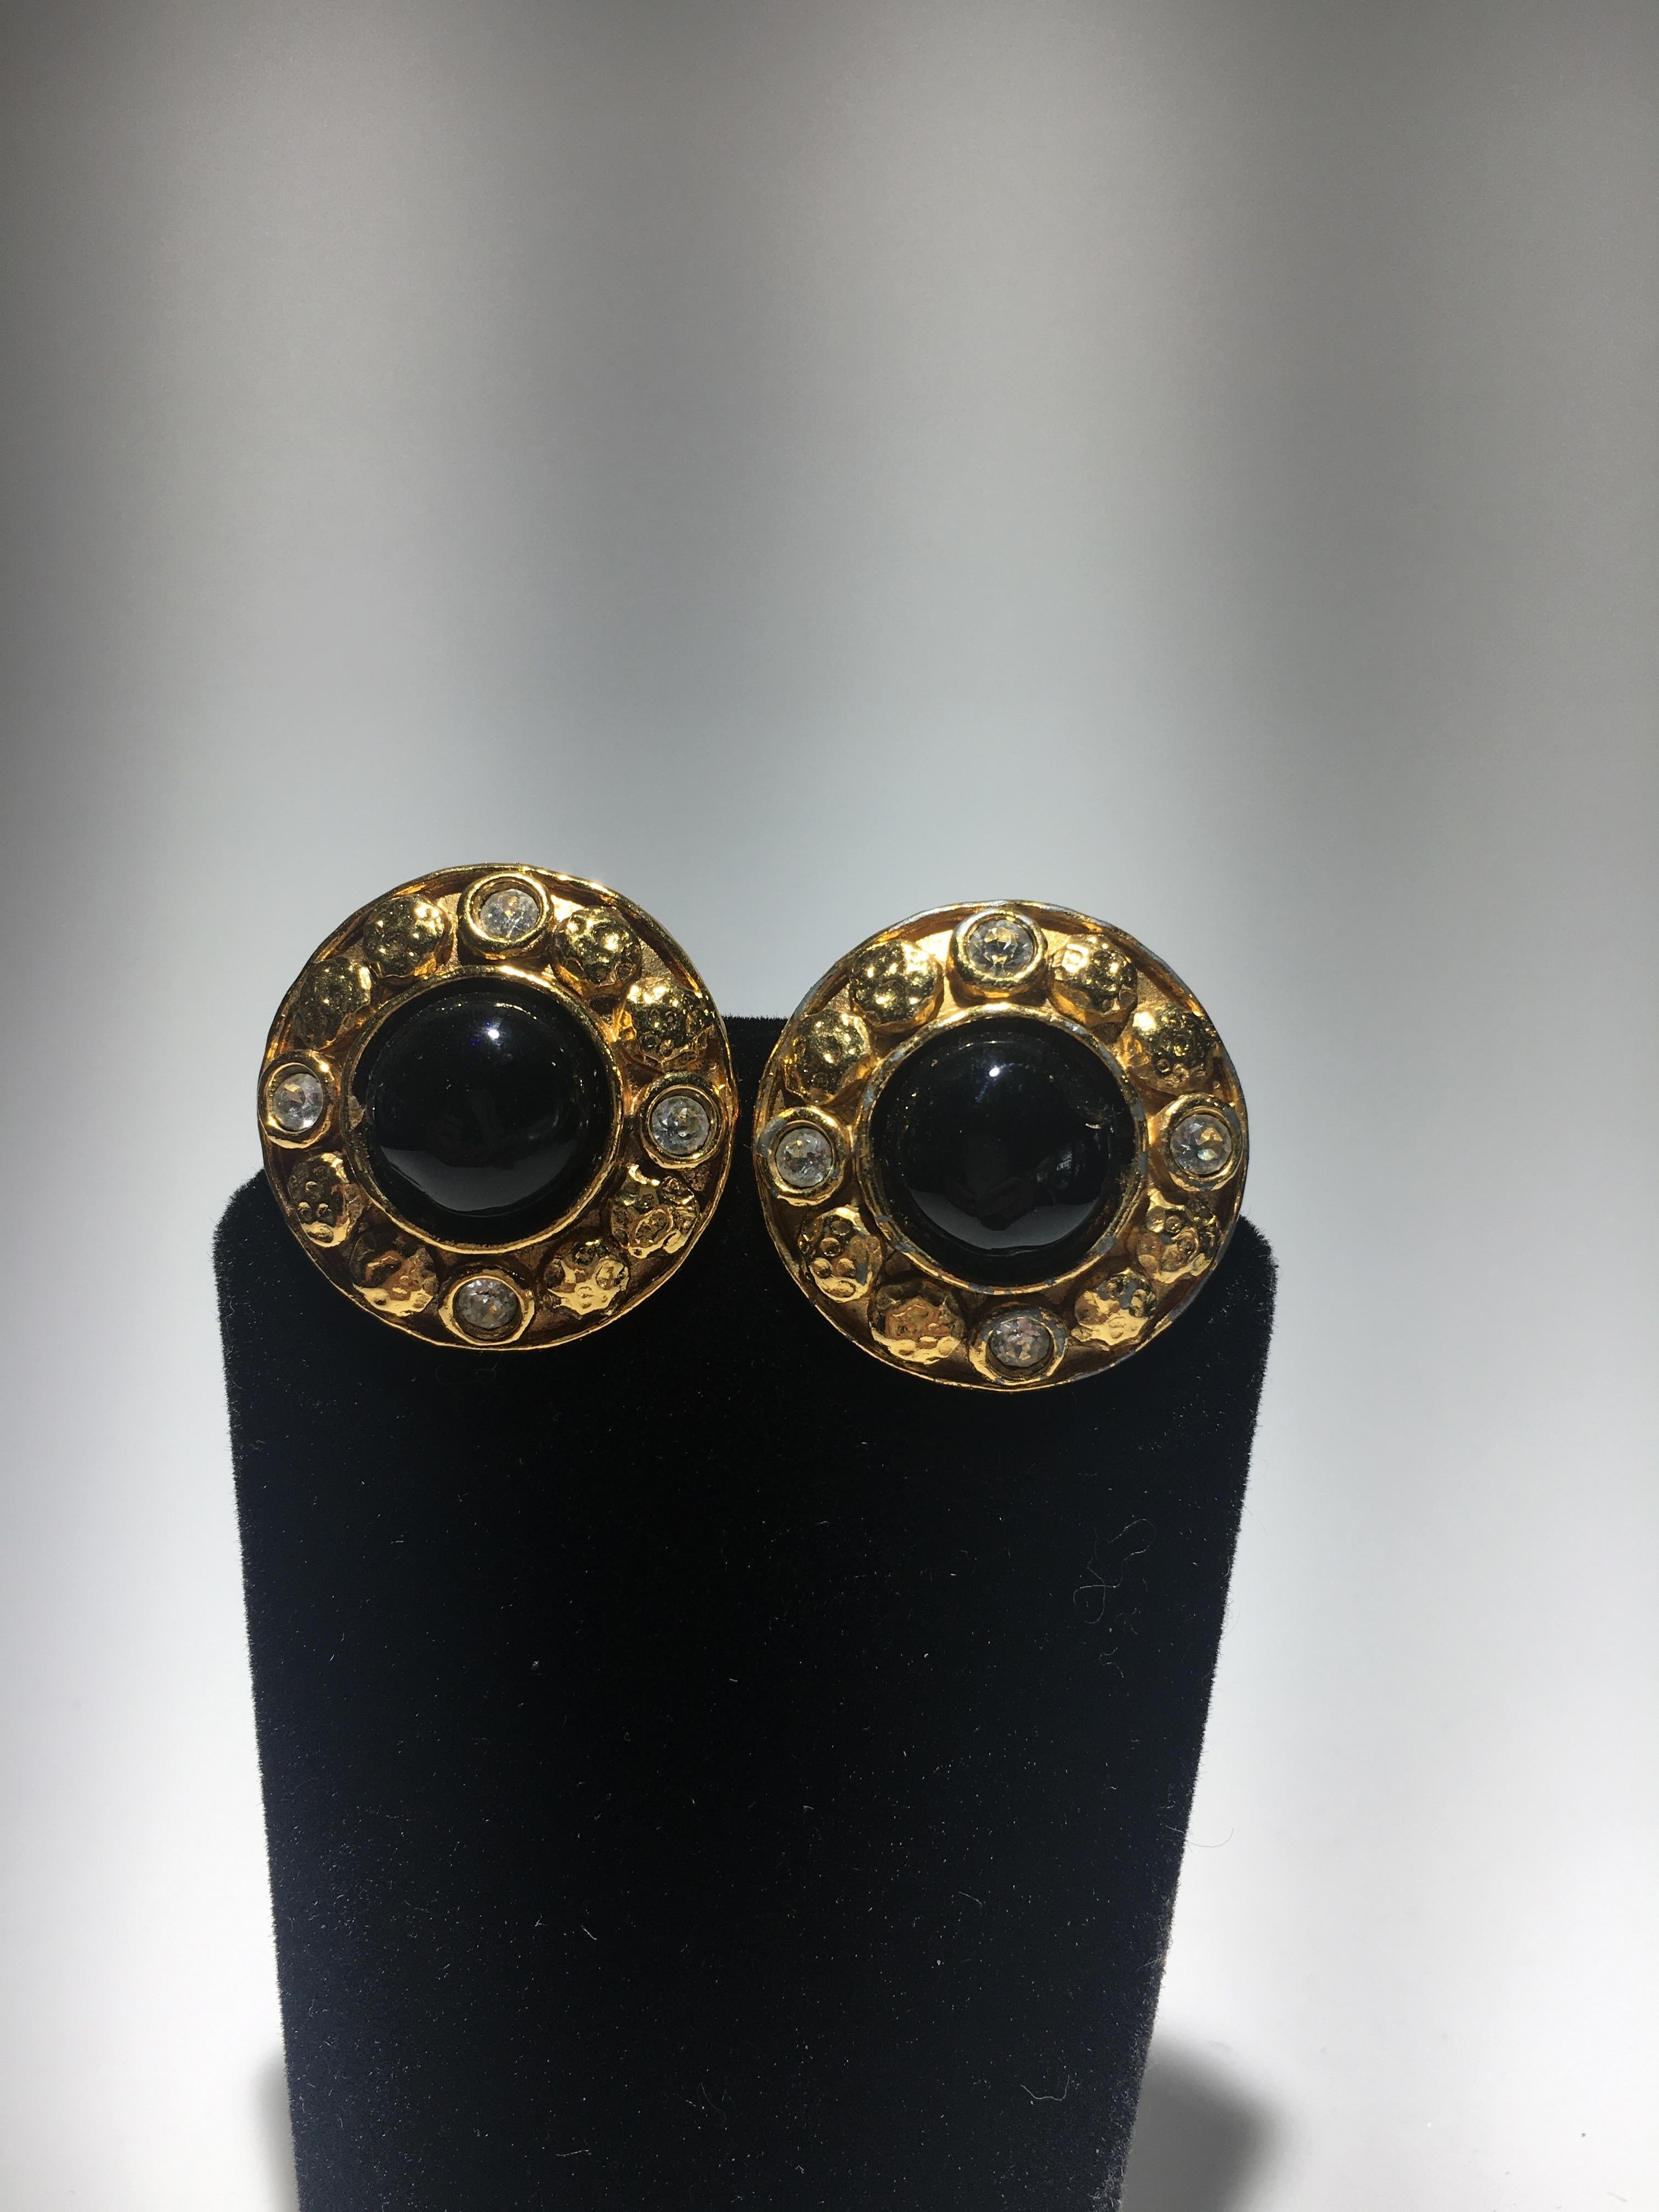 Chanel Gripoix And Gold Stud Evening Earrings.  Center Onyx Gripoix Surrounded By Cut Crystals.